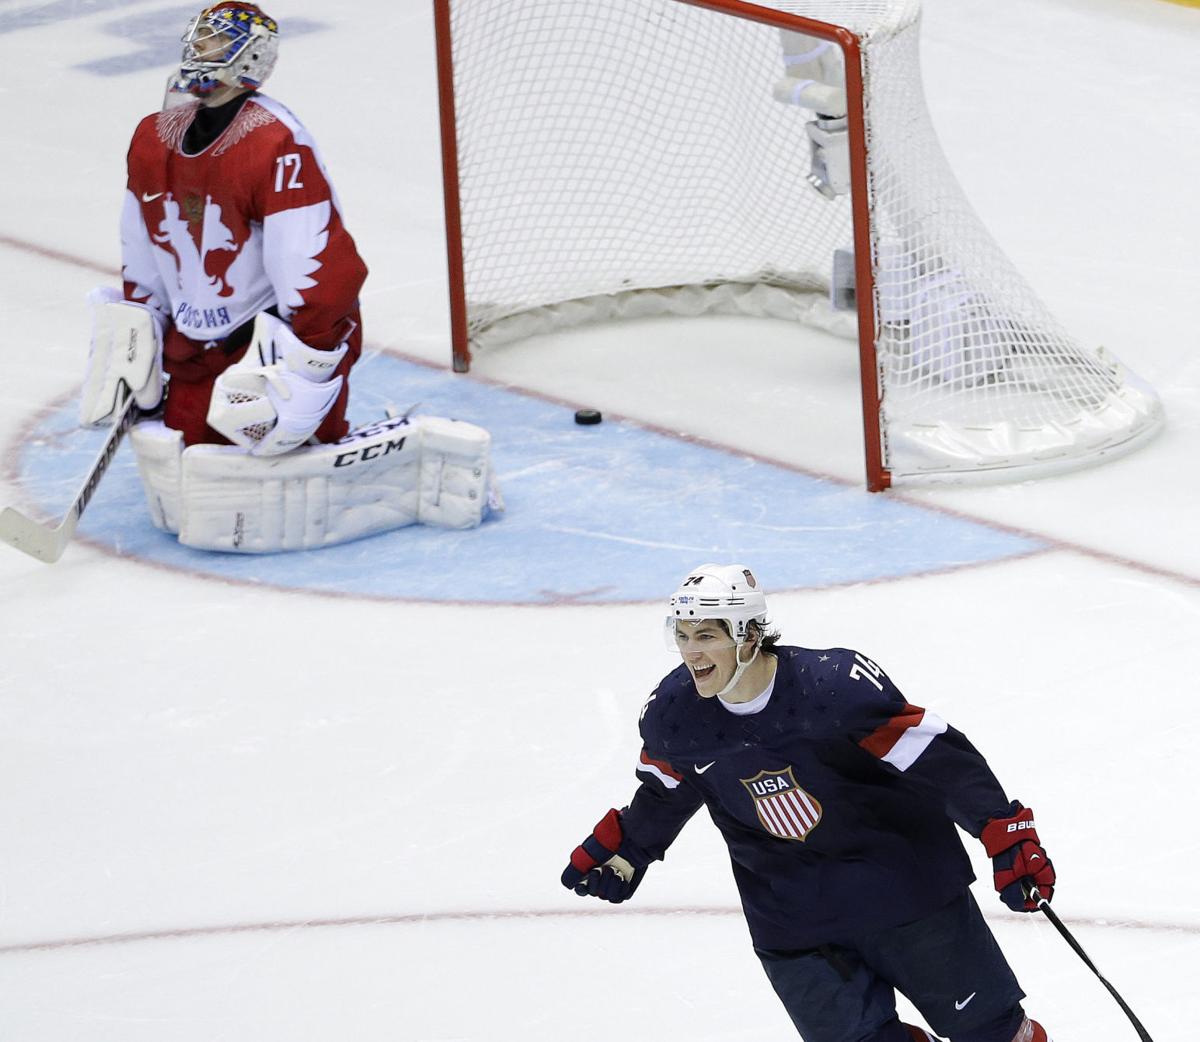 T.J. Oshie and his legendary Olympic shootout vs. Russia, one year later